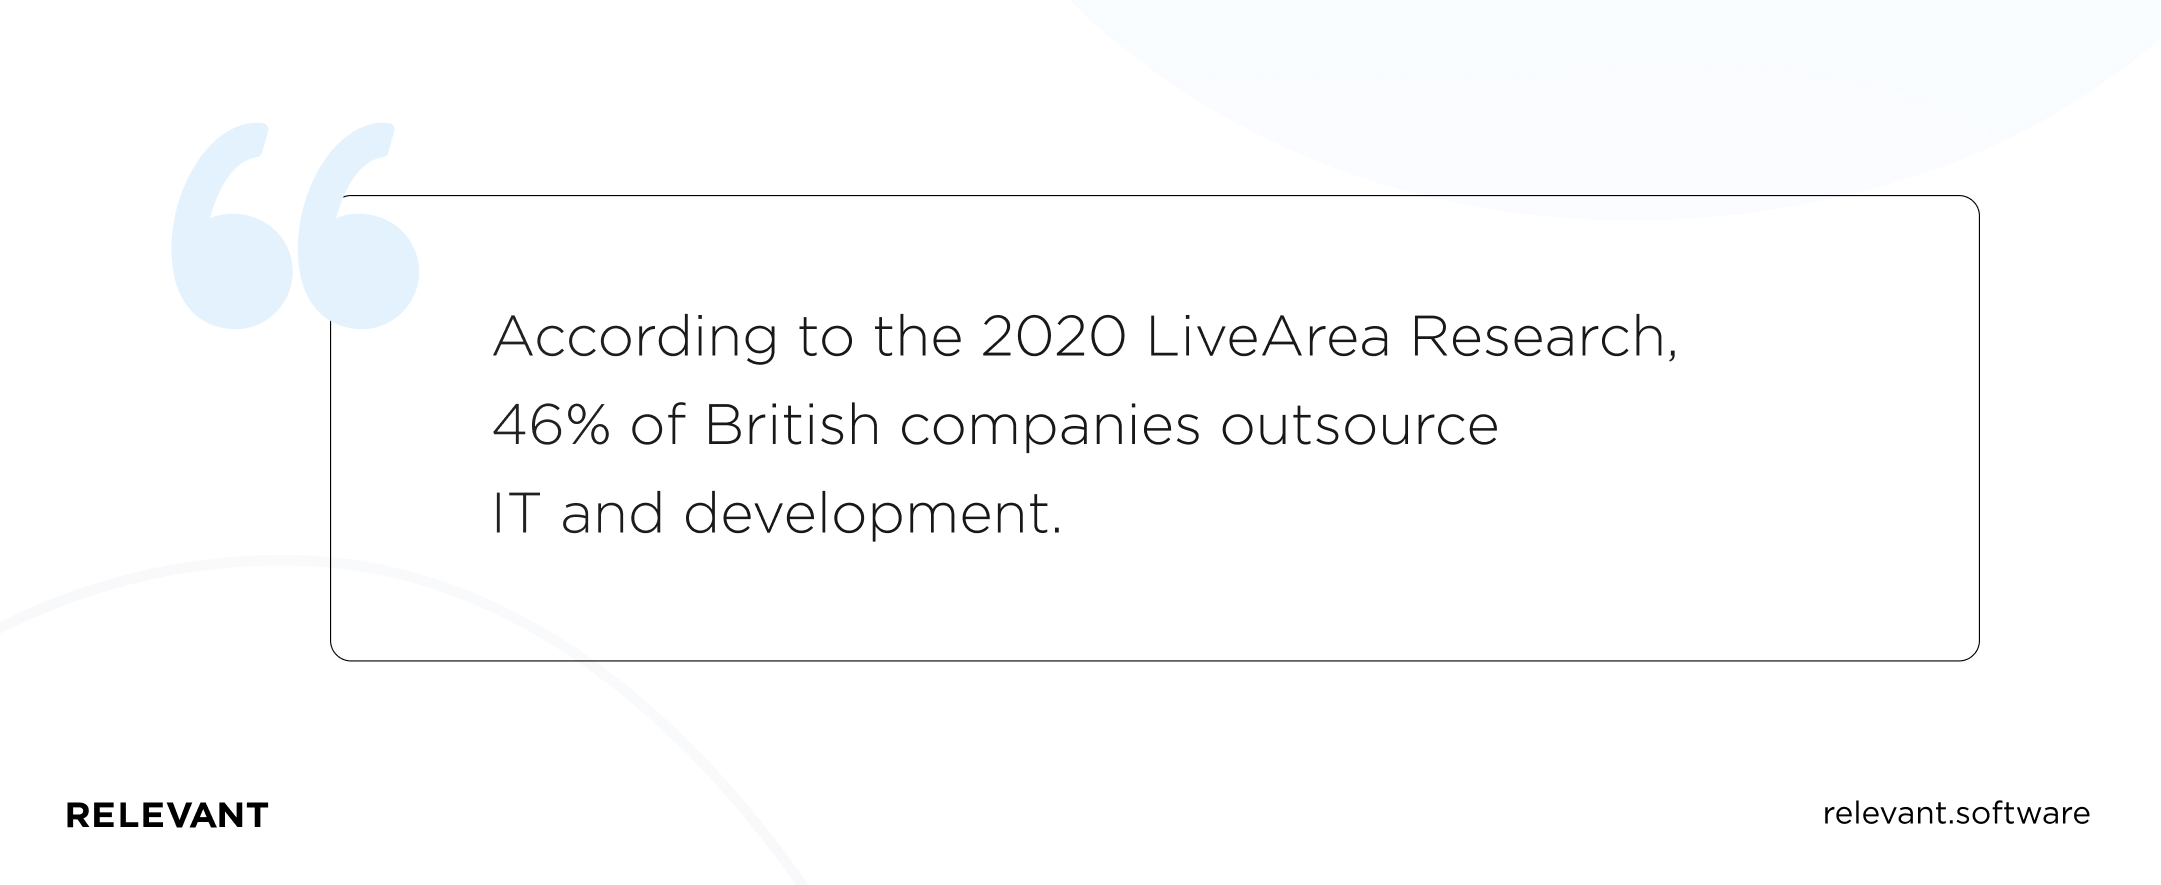 According to the 2020 LiveArea Research, 46% of British companies outsource IT and development.